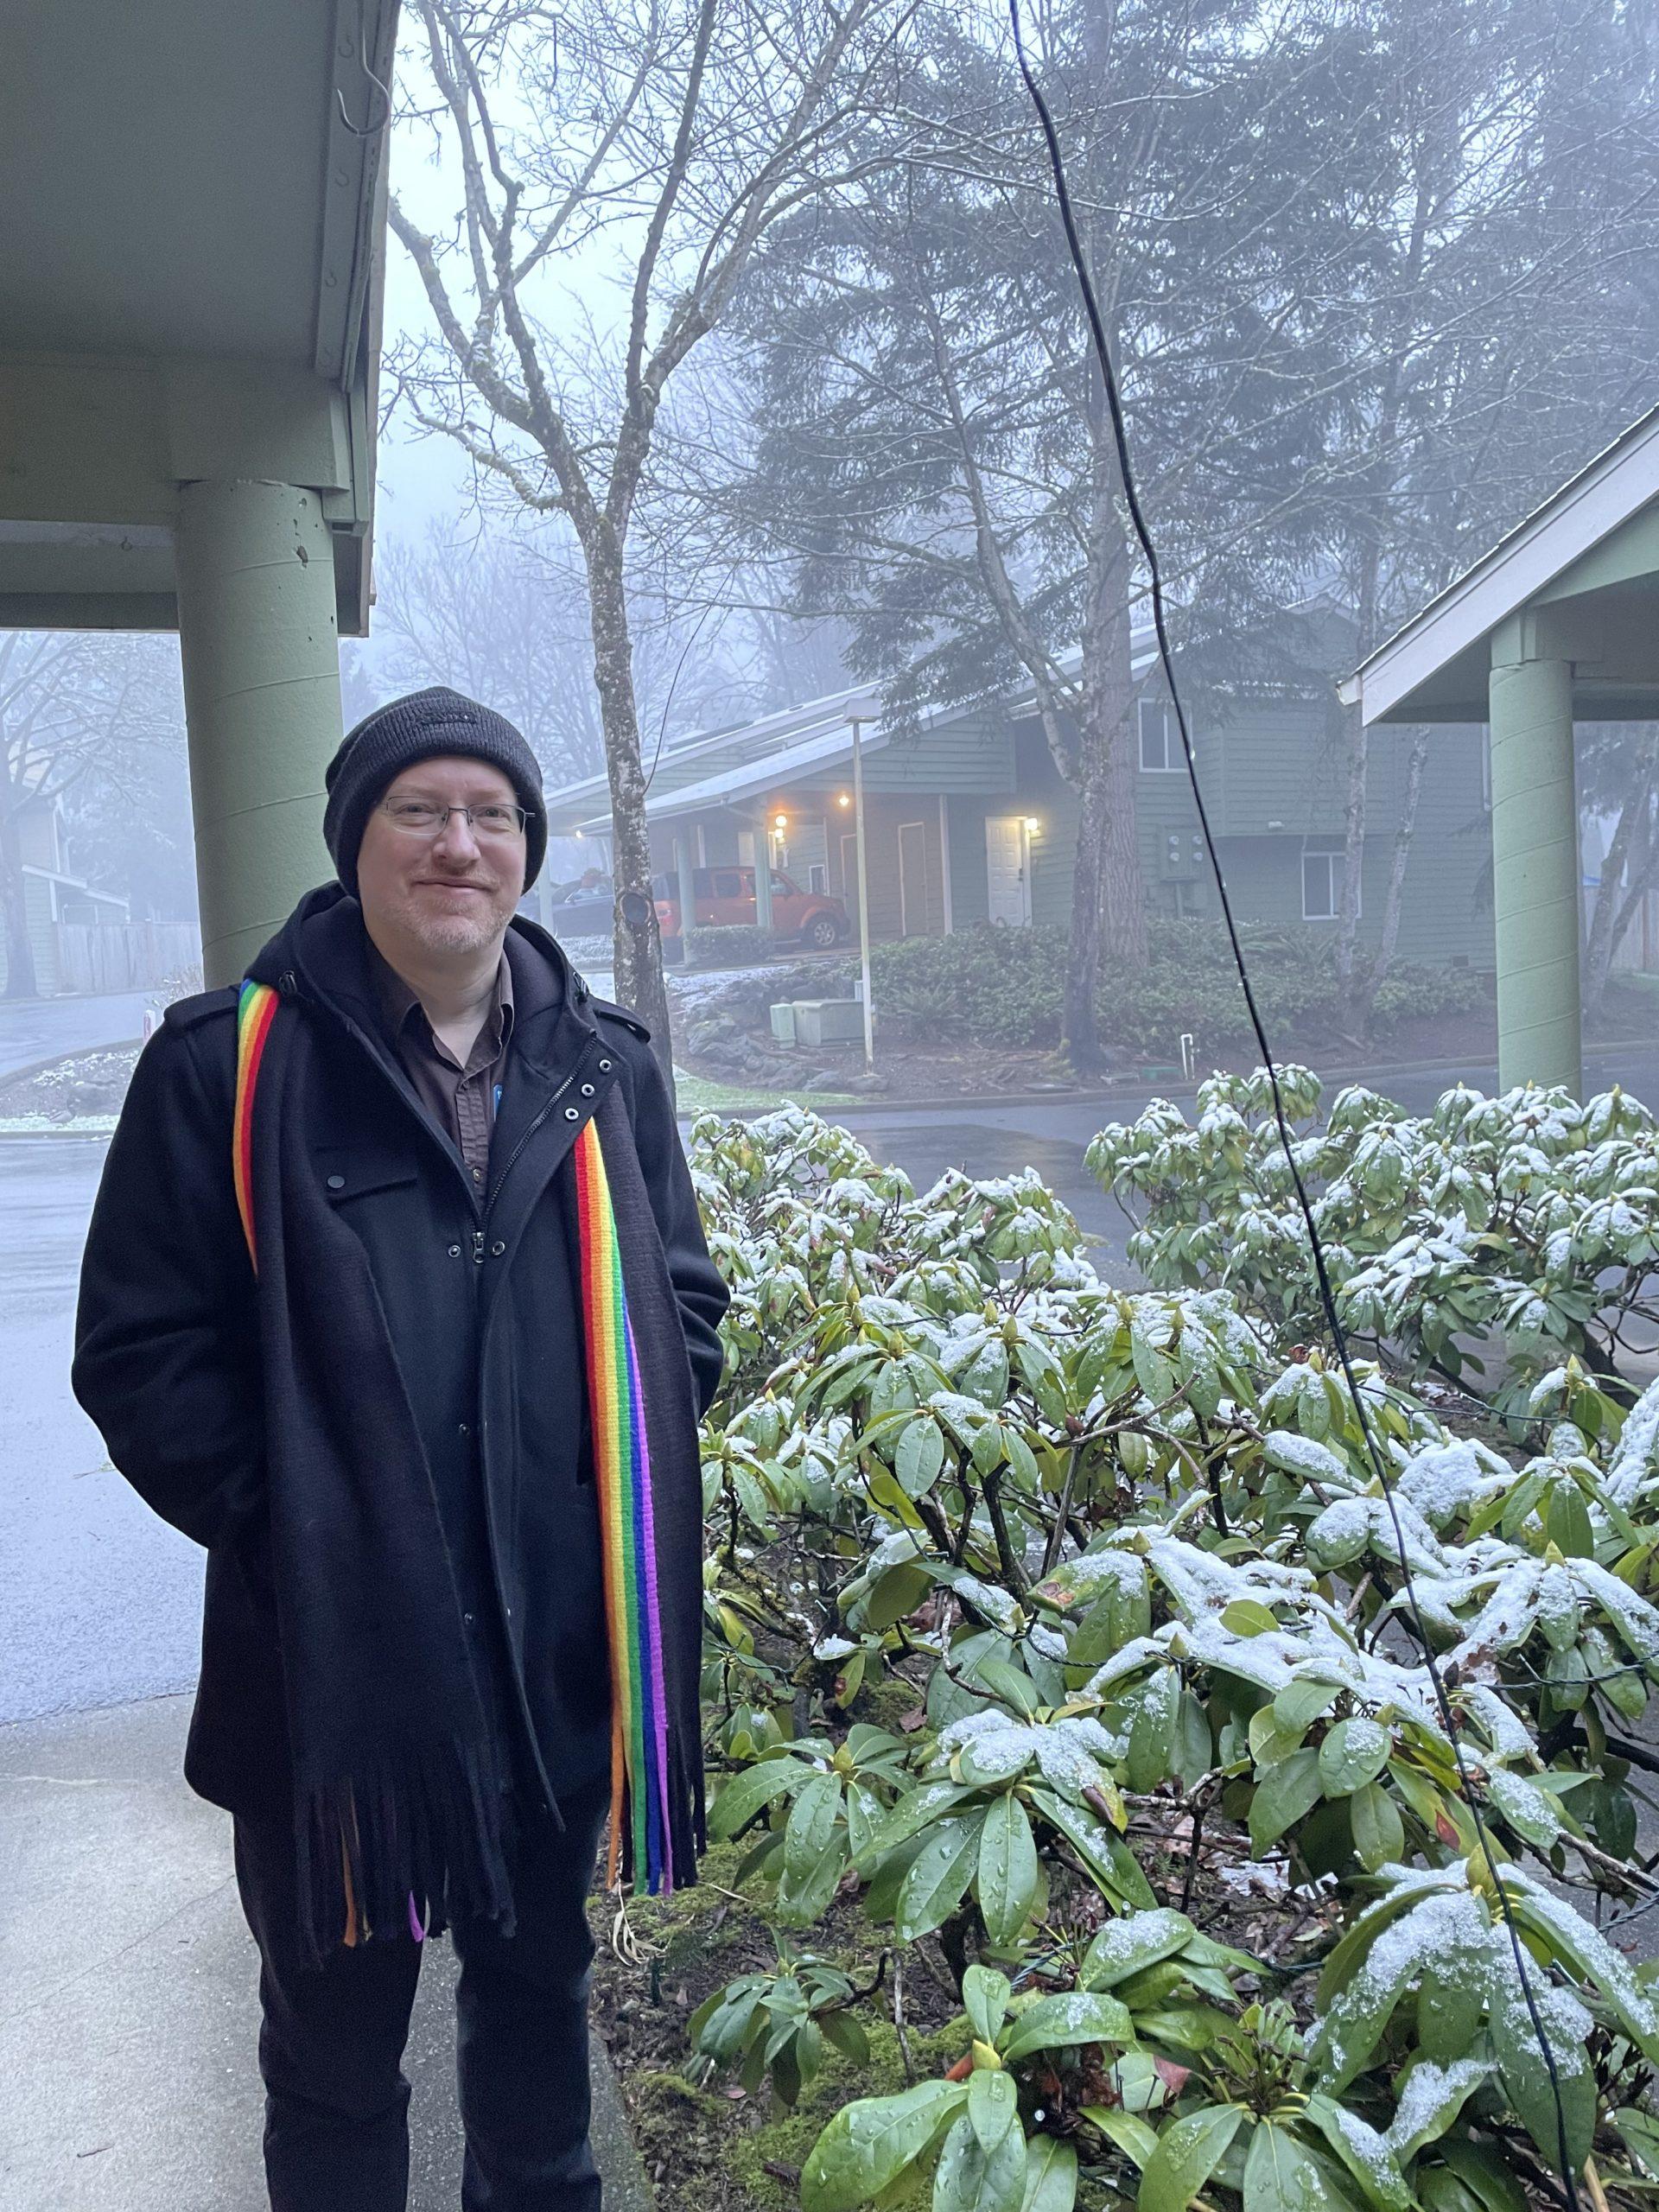 Me standing outside our house on a cold, foggy morning, wearing my winter coat, hat, and rainbow scarf, next to bushes dusted with snow.